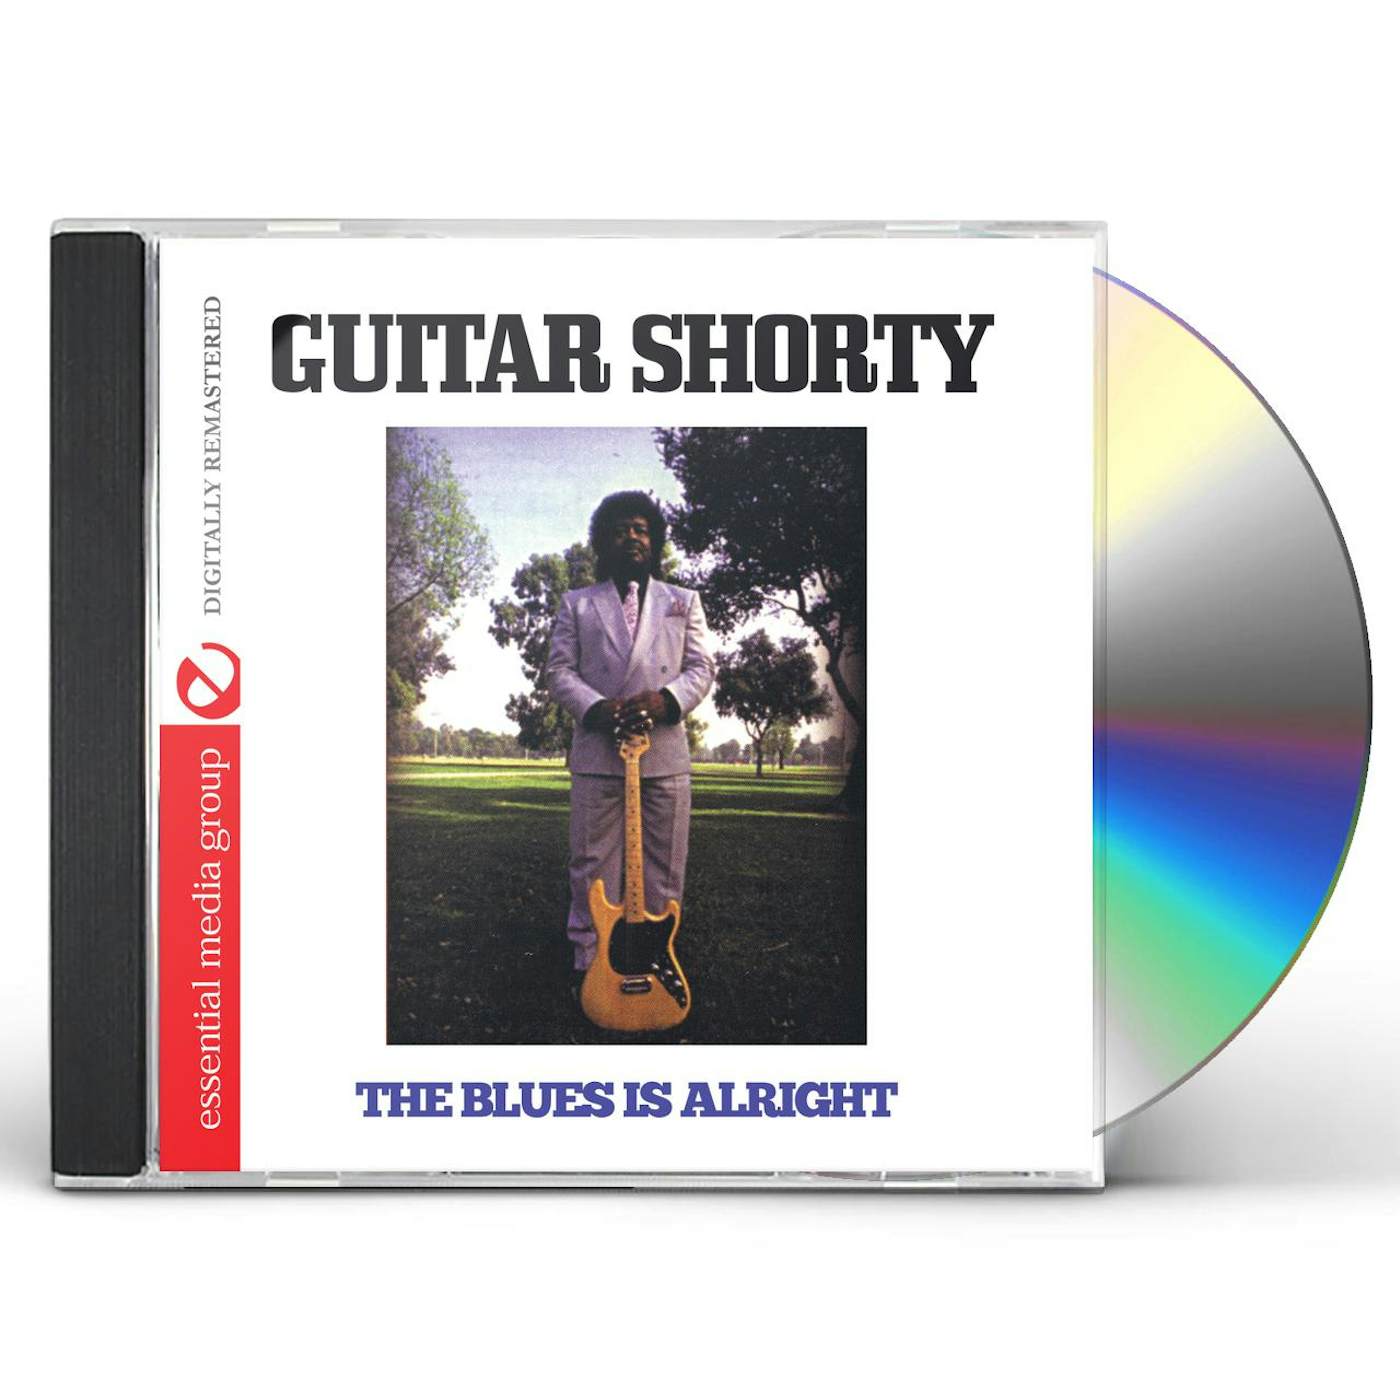 Guitar Shorty BLUES IS ALRIGHT CD